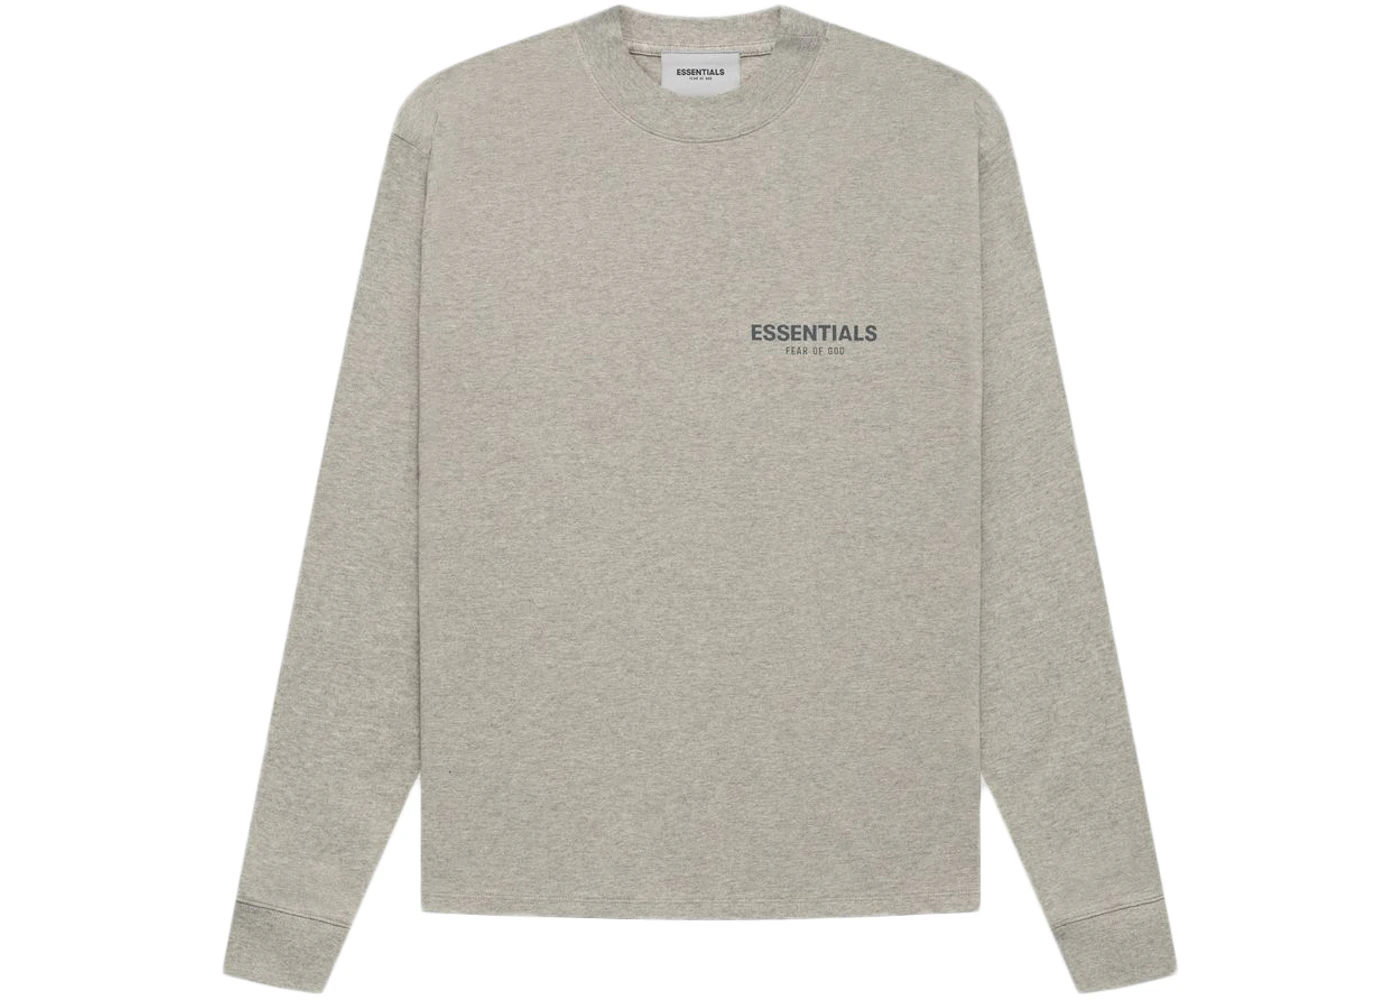 Fear of God Essentials Core Collection L/S T-shirt Dark Heather Oatmeal ...